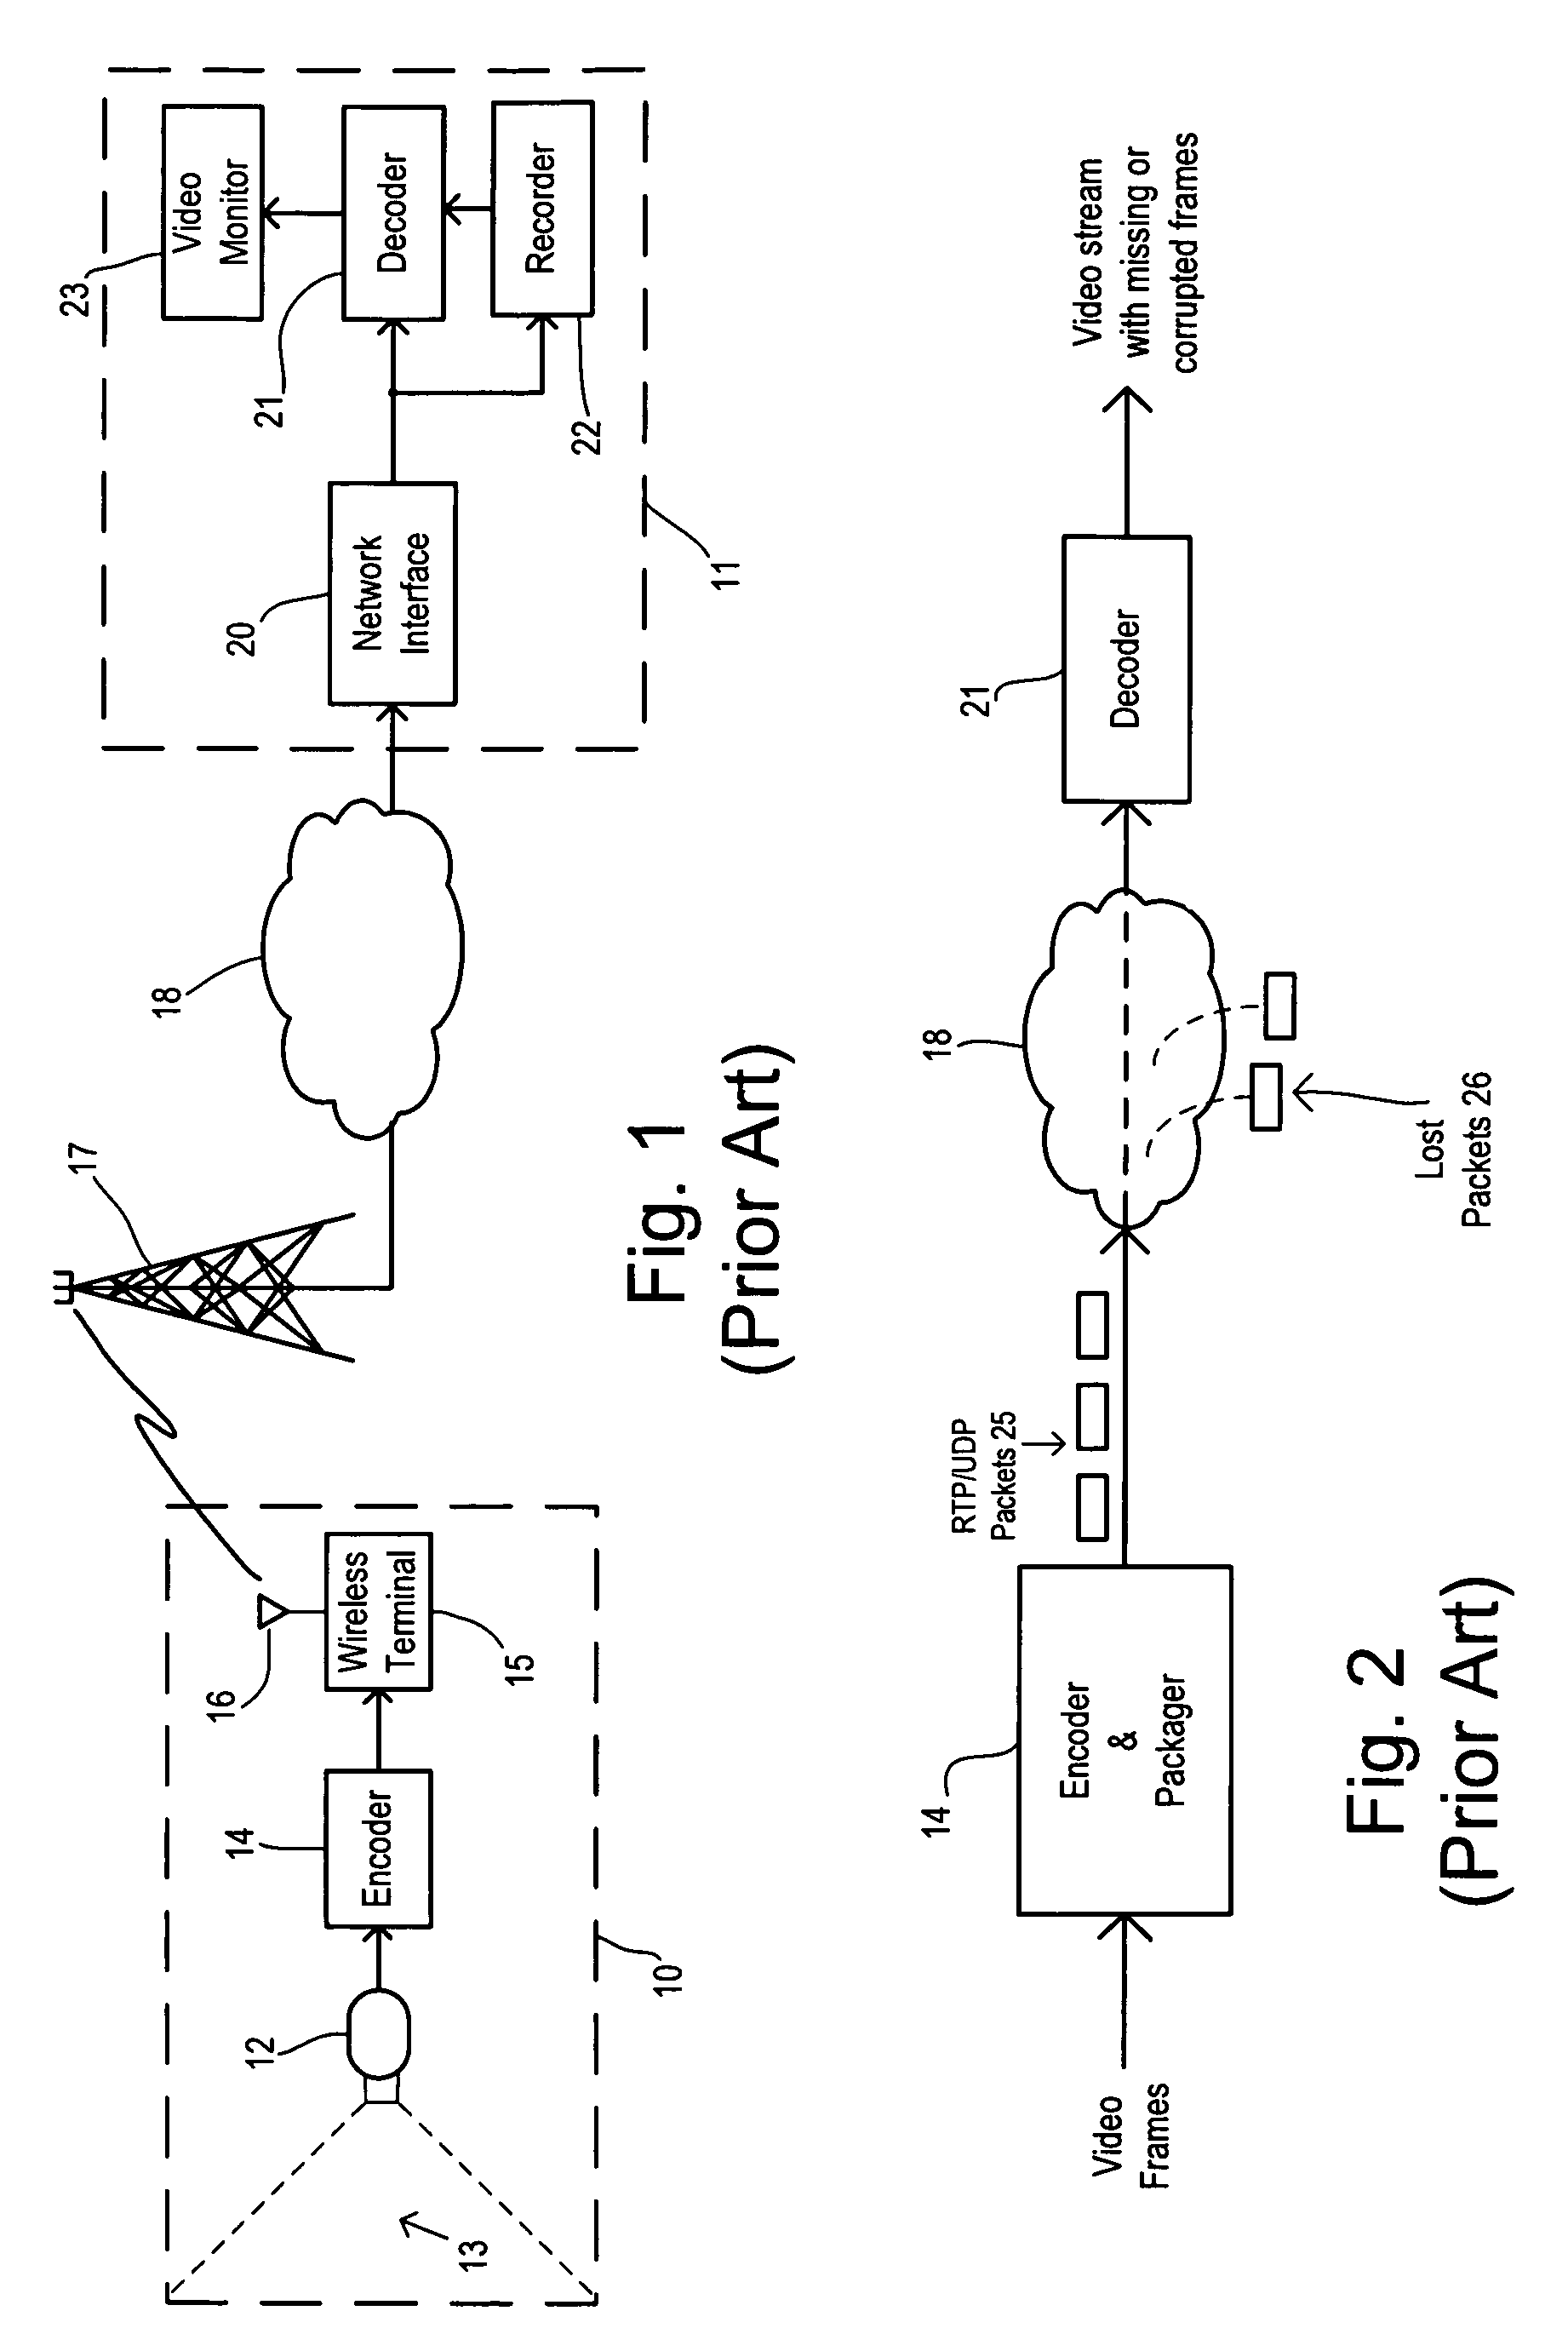 Simultaneous viewing and reliable recording of multimedia content over a network